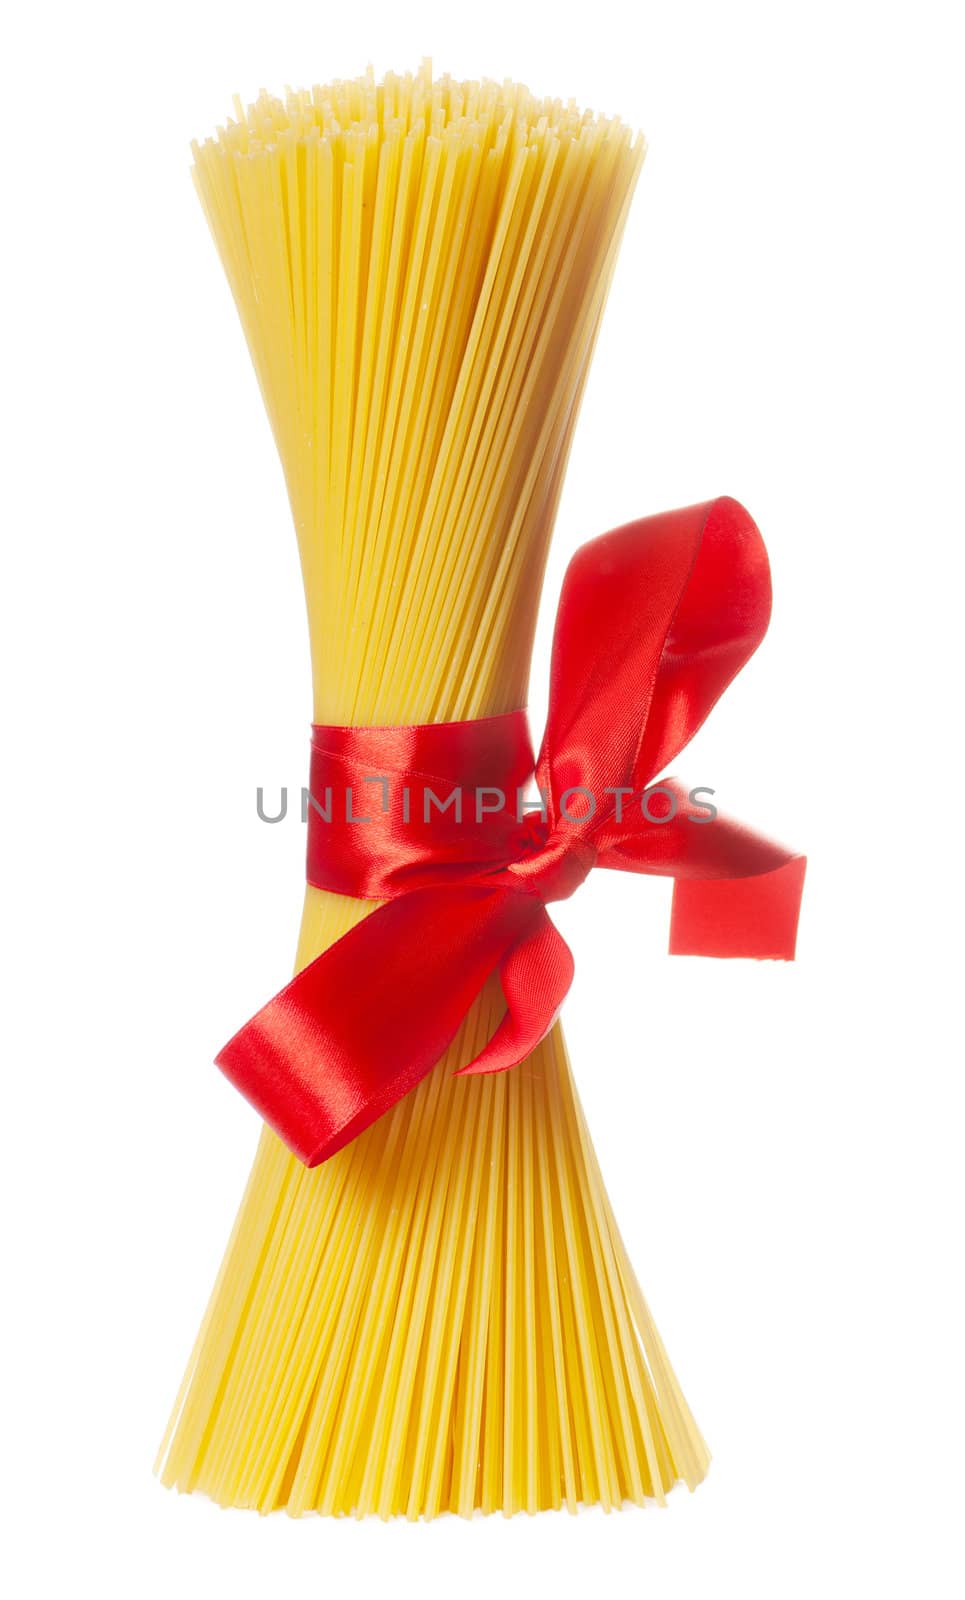 Bunch of spaghetti isolated over white background